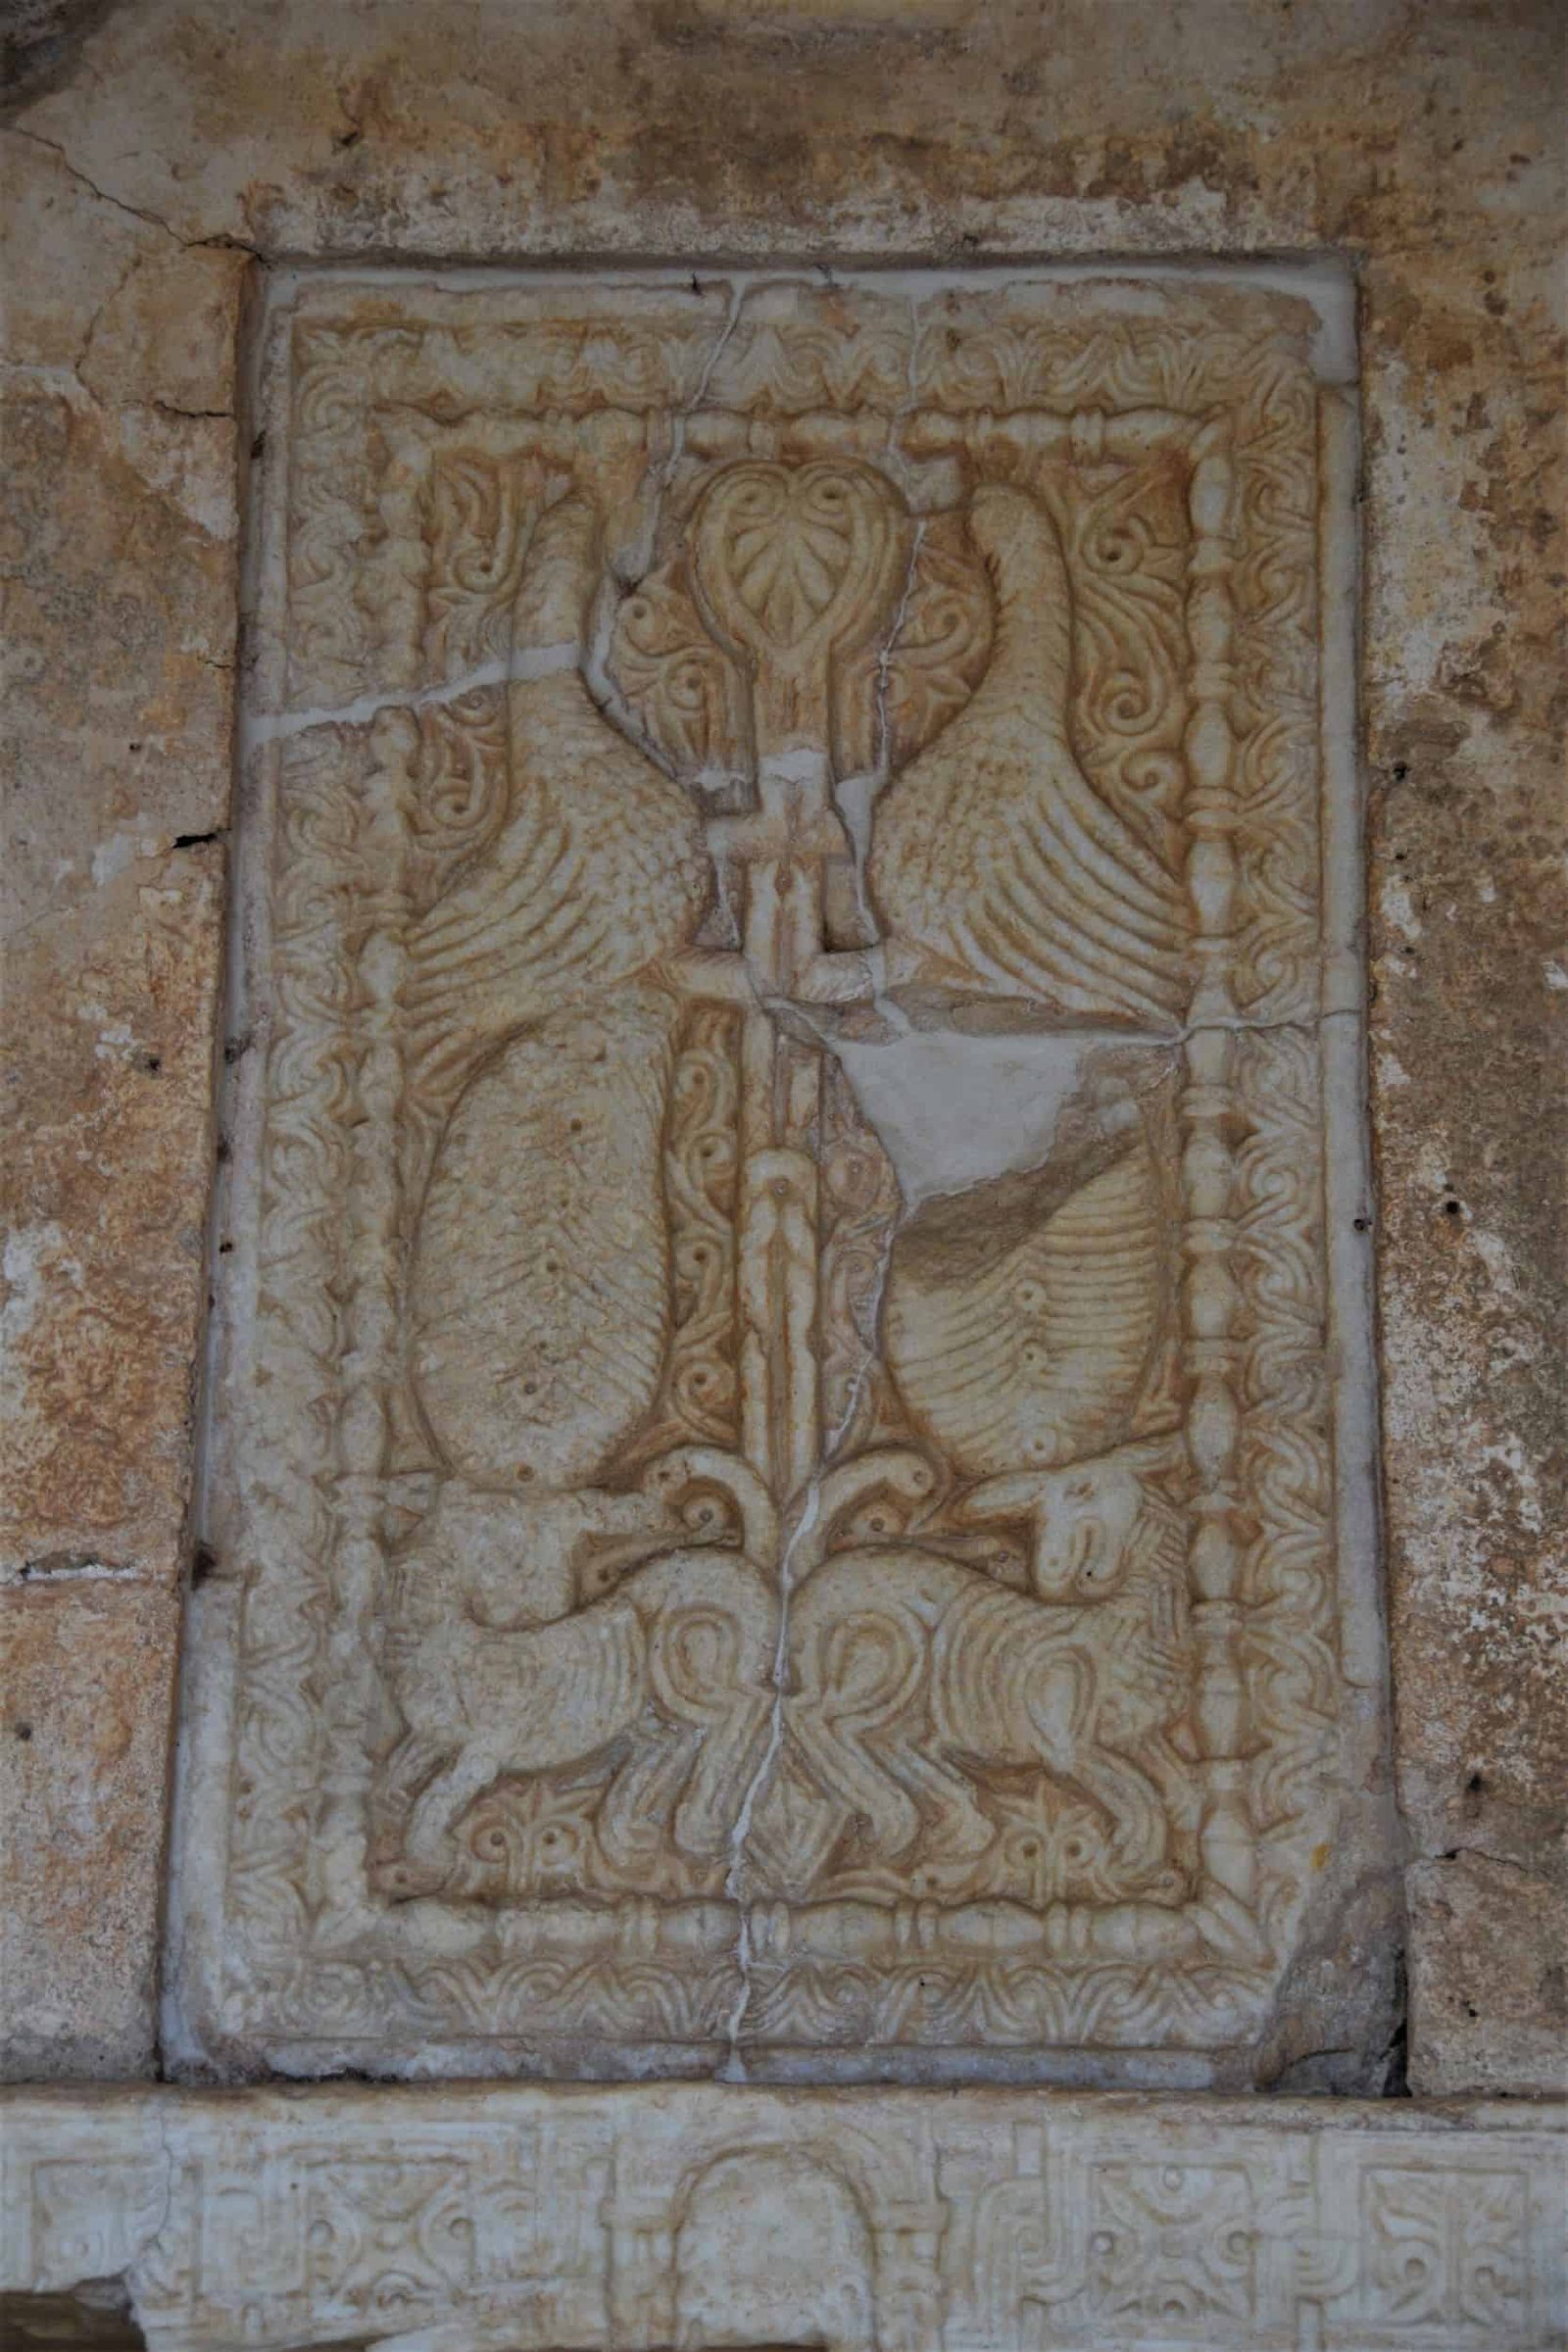 intricate adornment carved into a stoen wall showing two birds and cows, Greece